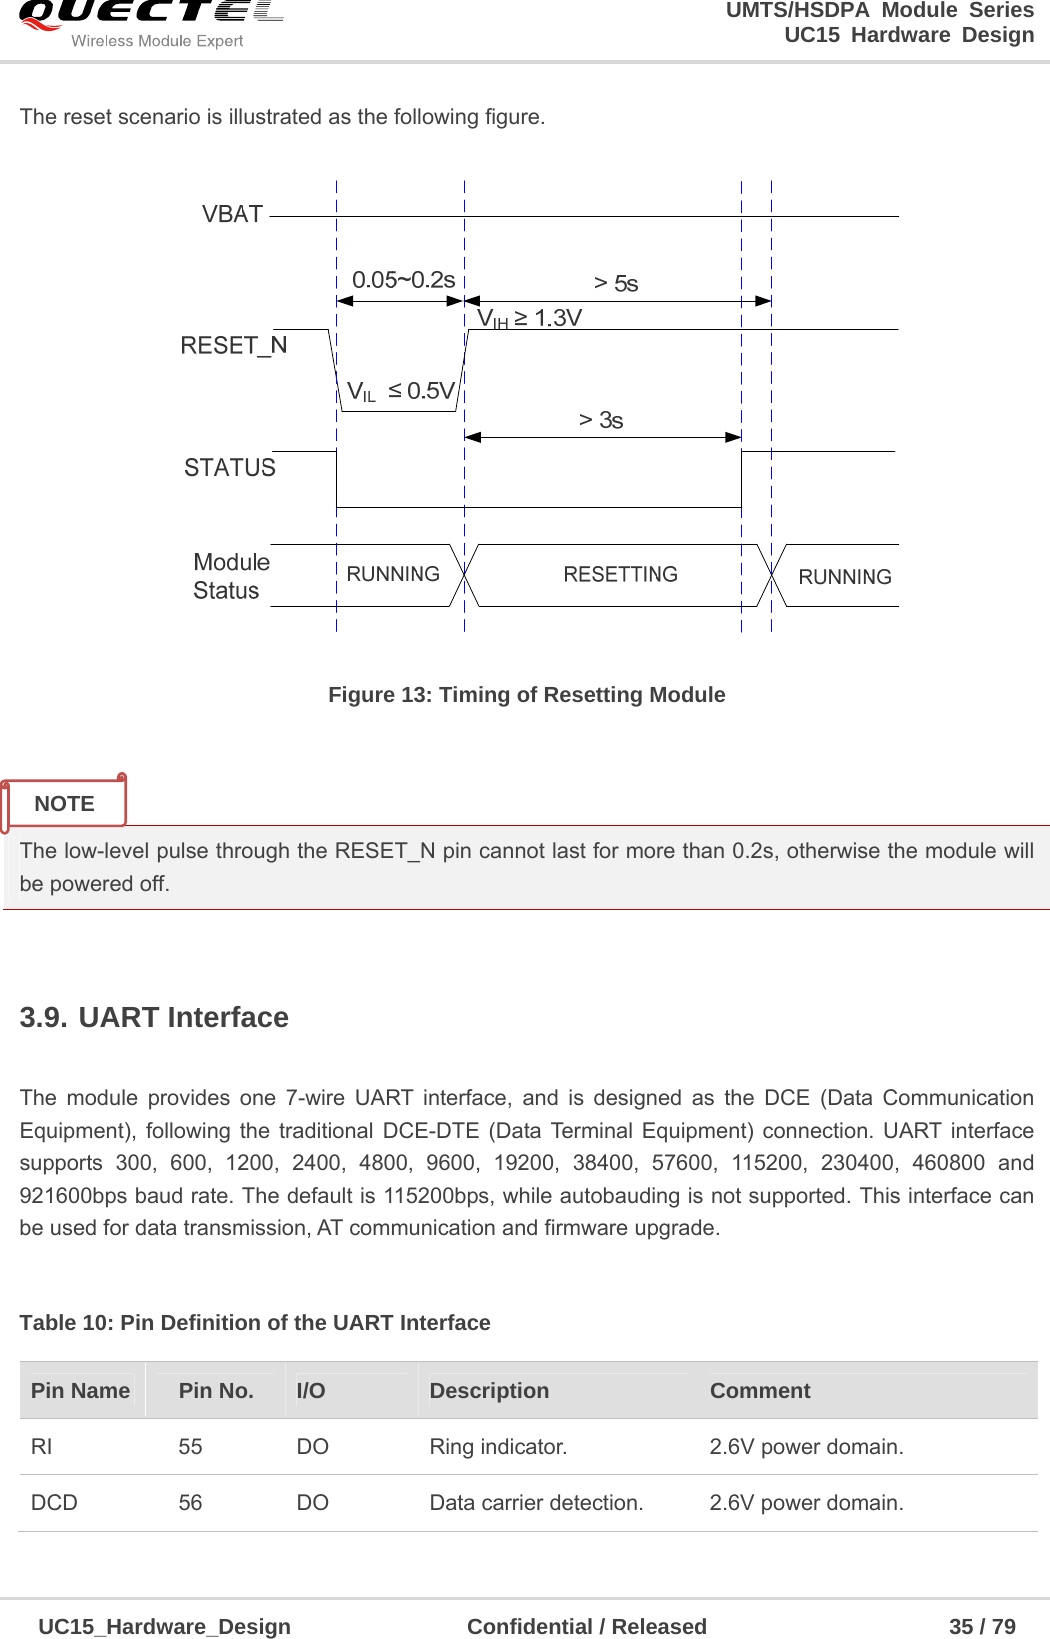                                                                        UMTS/HSDPA Module Series                                                                 UC15 Hardware Design  UC15_Hardware_Design                Confidential / Released                      35 / 79    The reset scenario is illustrated as the following figure.  Figure 13: Timing of Resetting Module   The low-level pulse through the RESET_N pin cannot last for more than 0.2s, otherwise the module will be powered off.    3.9. UART Interface  The module provides one 7-wire UART interface, and is designed as the DCE (Data Communication Equipment), following the traditional DCE-DTE (Data Terminal Equipment) connection. UART interface supports 300, 600, 1200, 2400, 4800, 9600, 19200, 38400, 57600, 115200, 230400, 460800 and 921600bps baud rate. The default is 115200bps, while autobauding is not supported. This interface can be used for data transmission, AT communication and firmware upgrade.  Table 10: Pin Definition of the UART Interface Pin Name    Pin No.  I/O  Description   Comment RI  55  DO  Ring indicator.  2.6V power domain. DCD  56  DO  Data carrier detection. 2.6V power domain. NOTE 